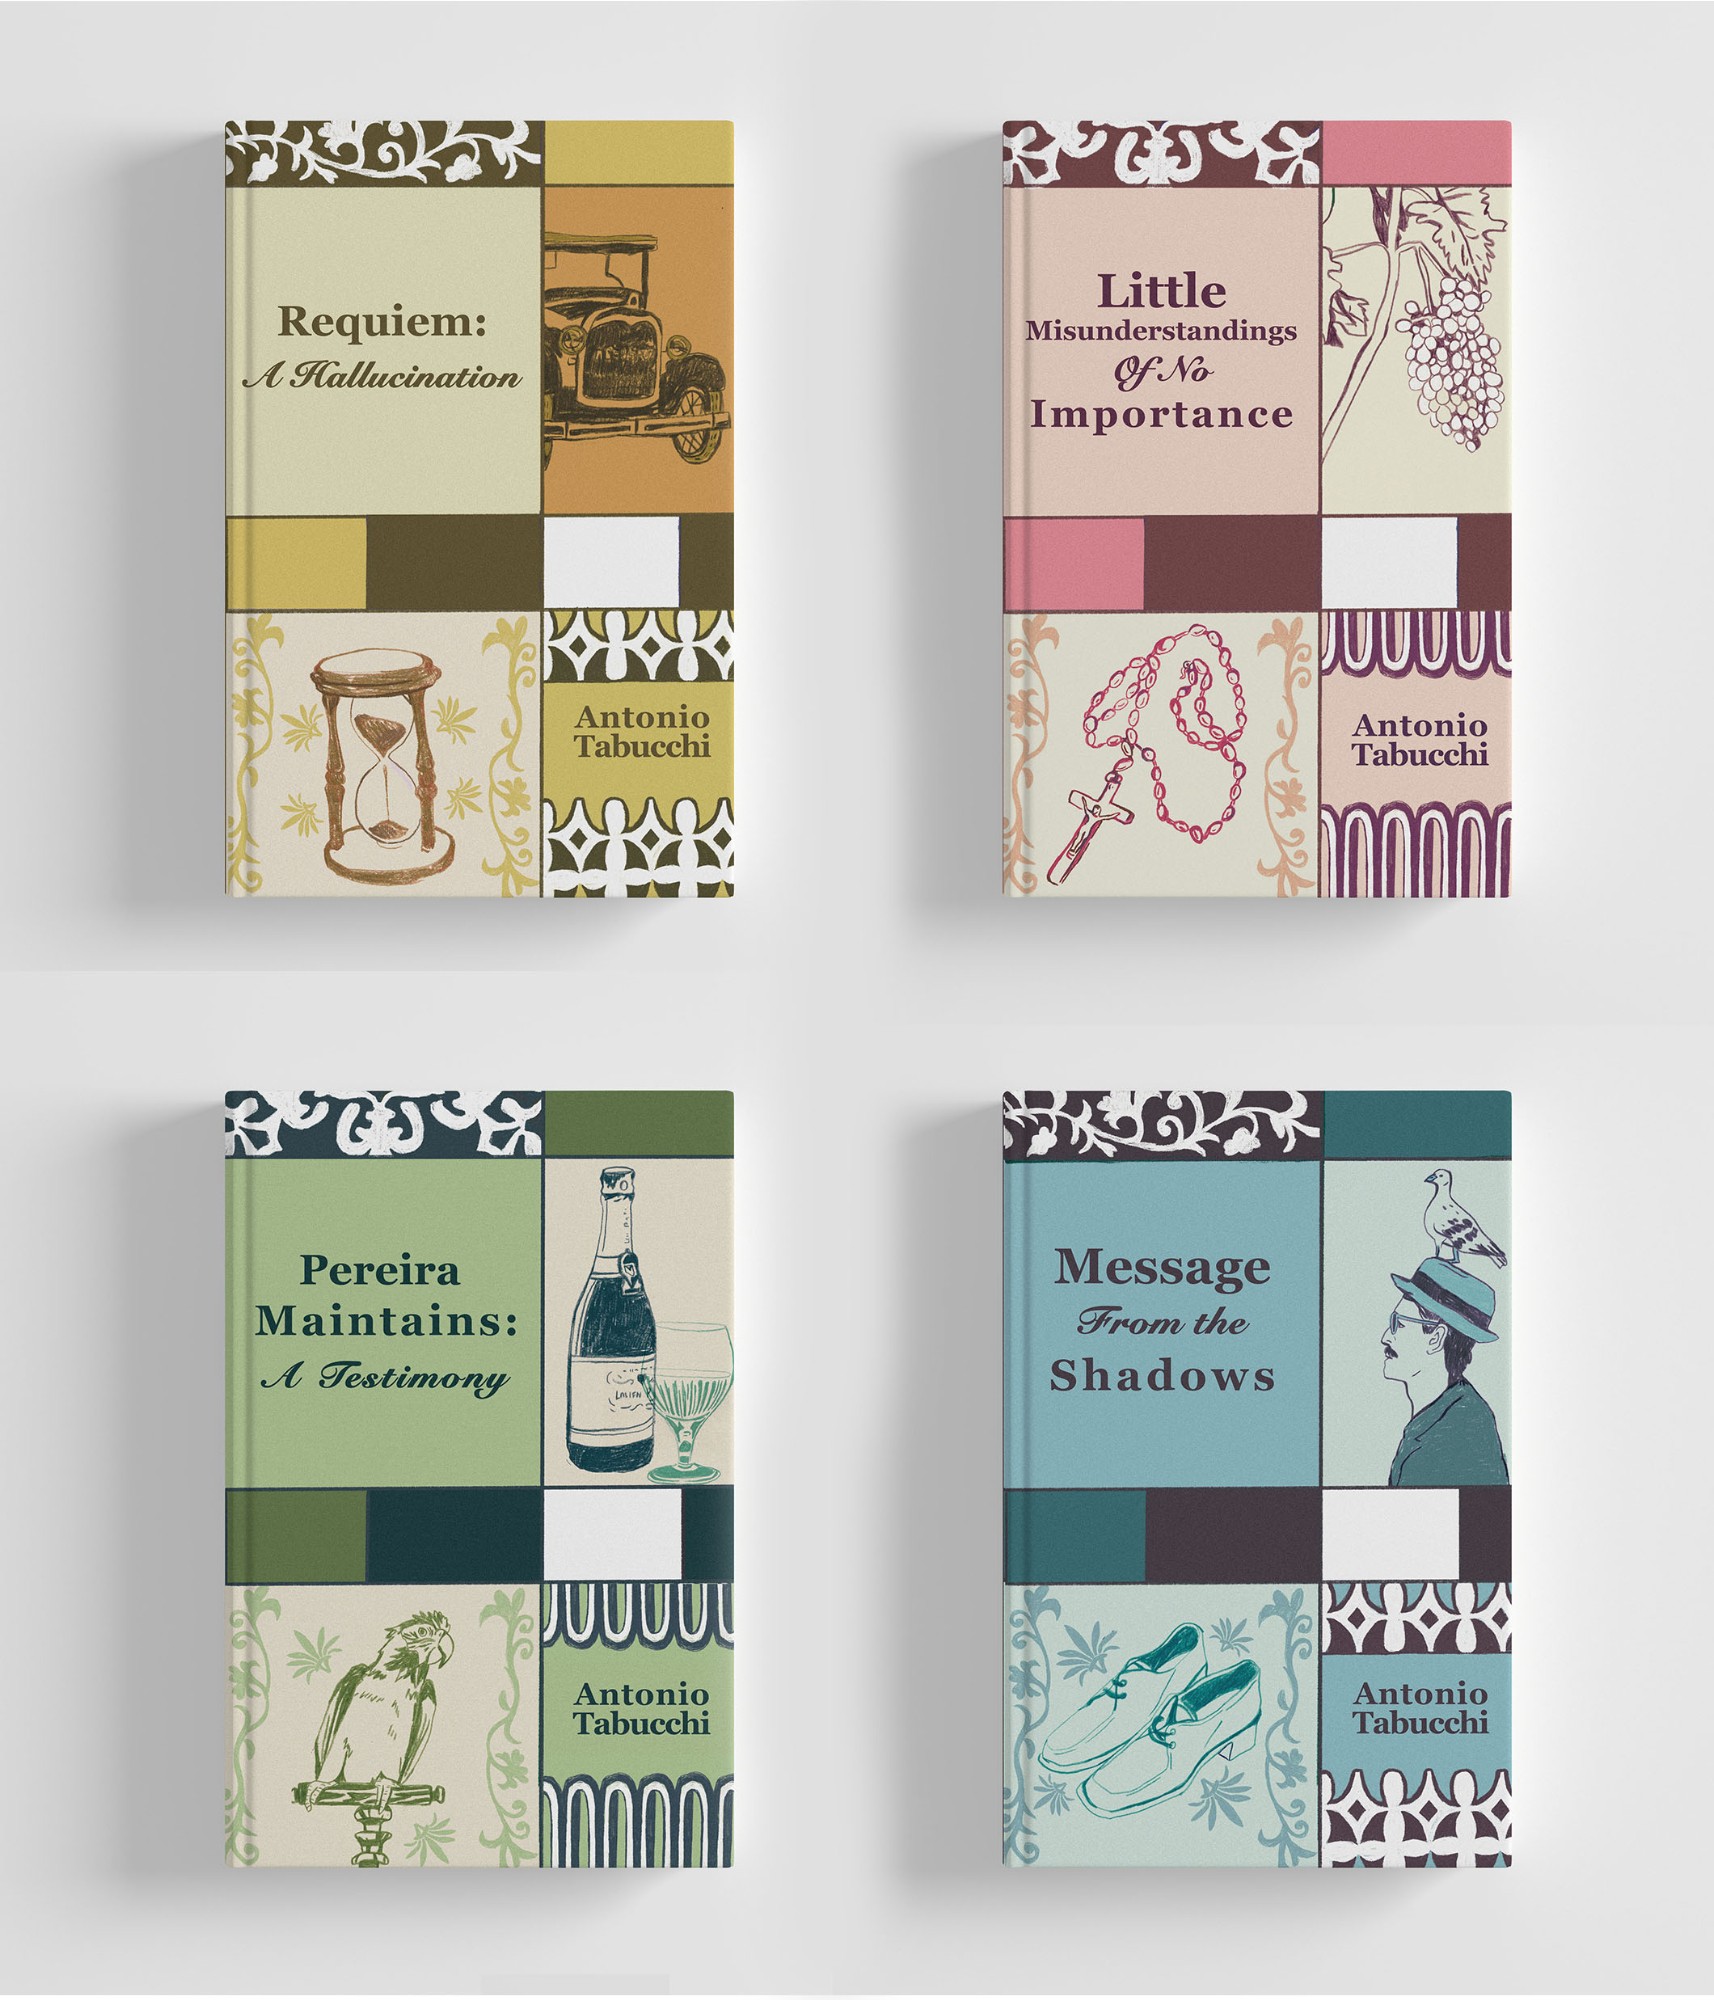 Antonio Tabucchi book covers. A set of 4 book cover designs reflecting the tiles in the city of Lisbon, where the stories are set.